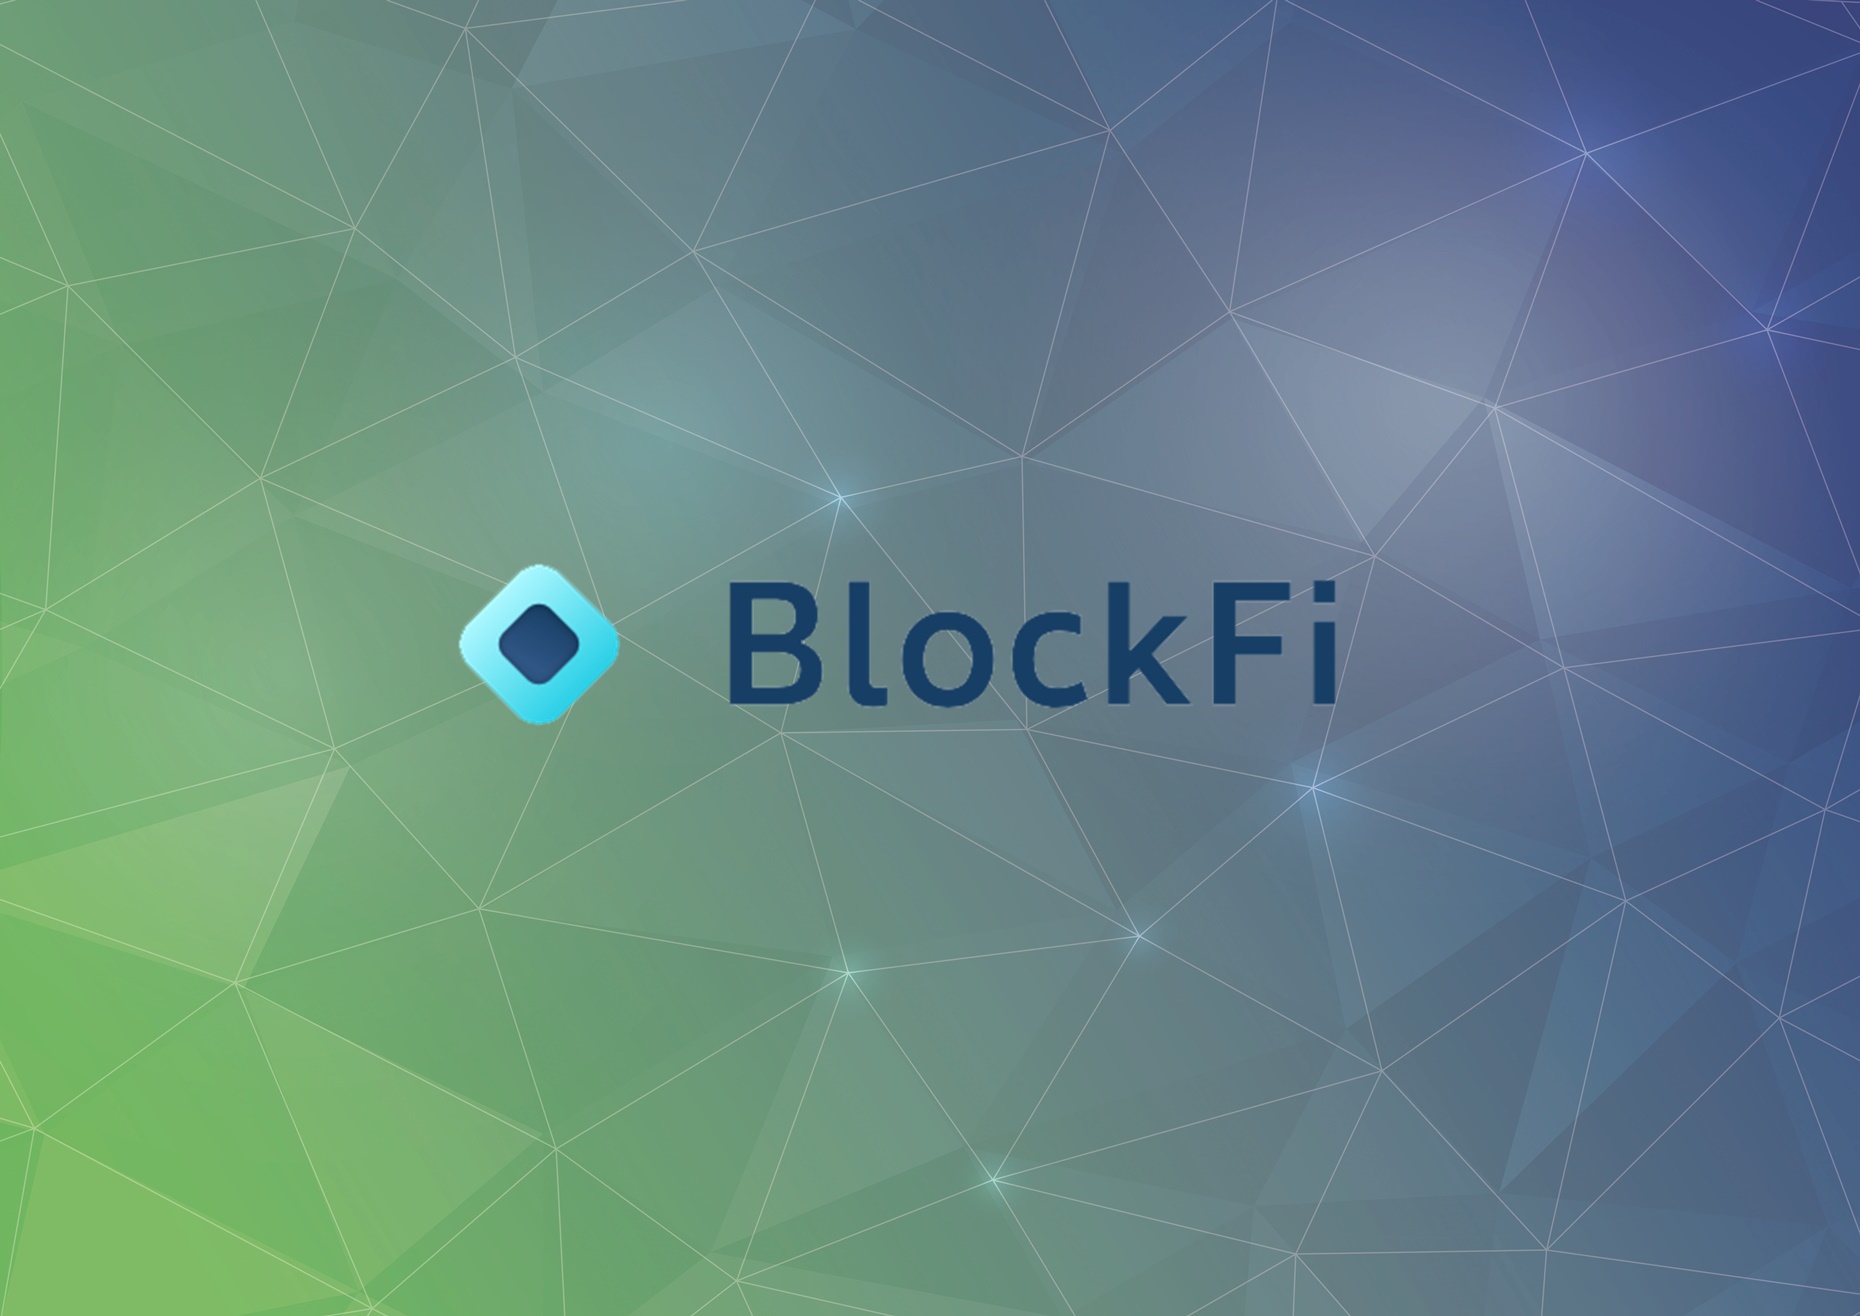 BlockFi: Is it Safe, Legit and Worth Your Time?